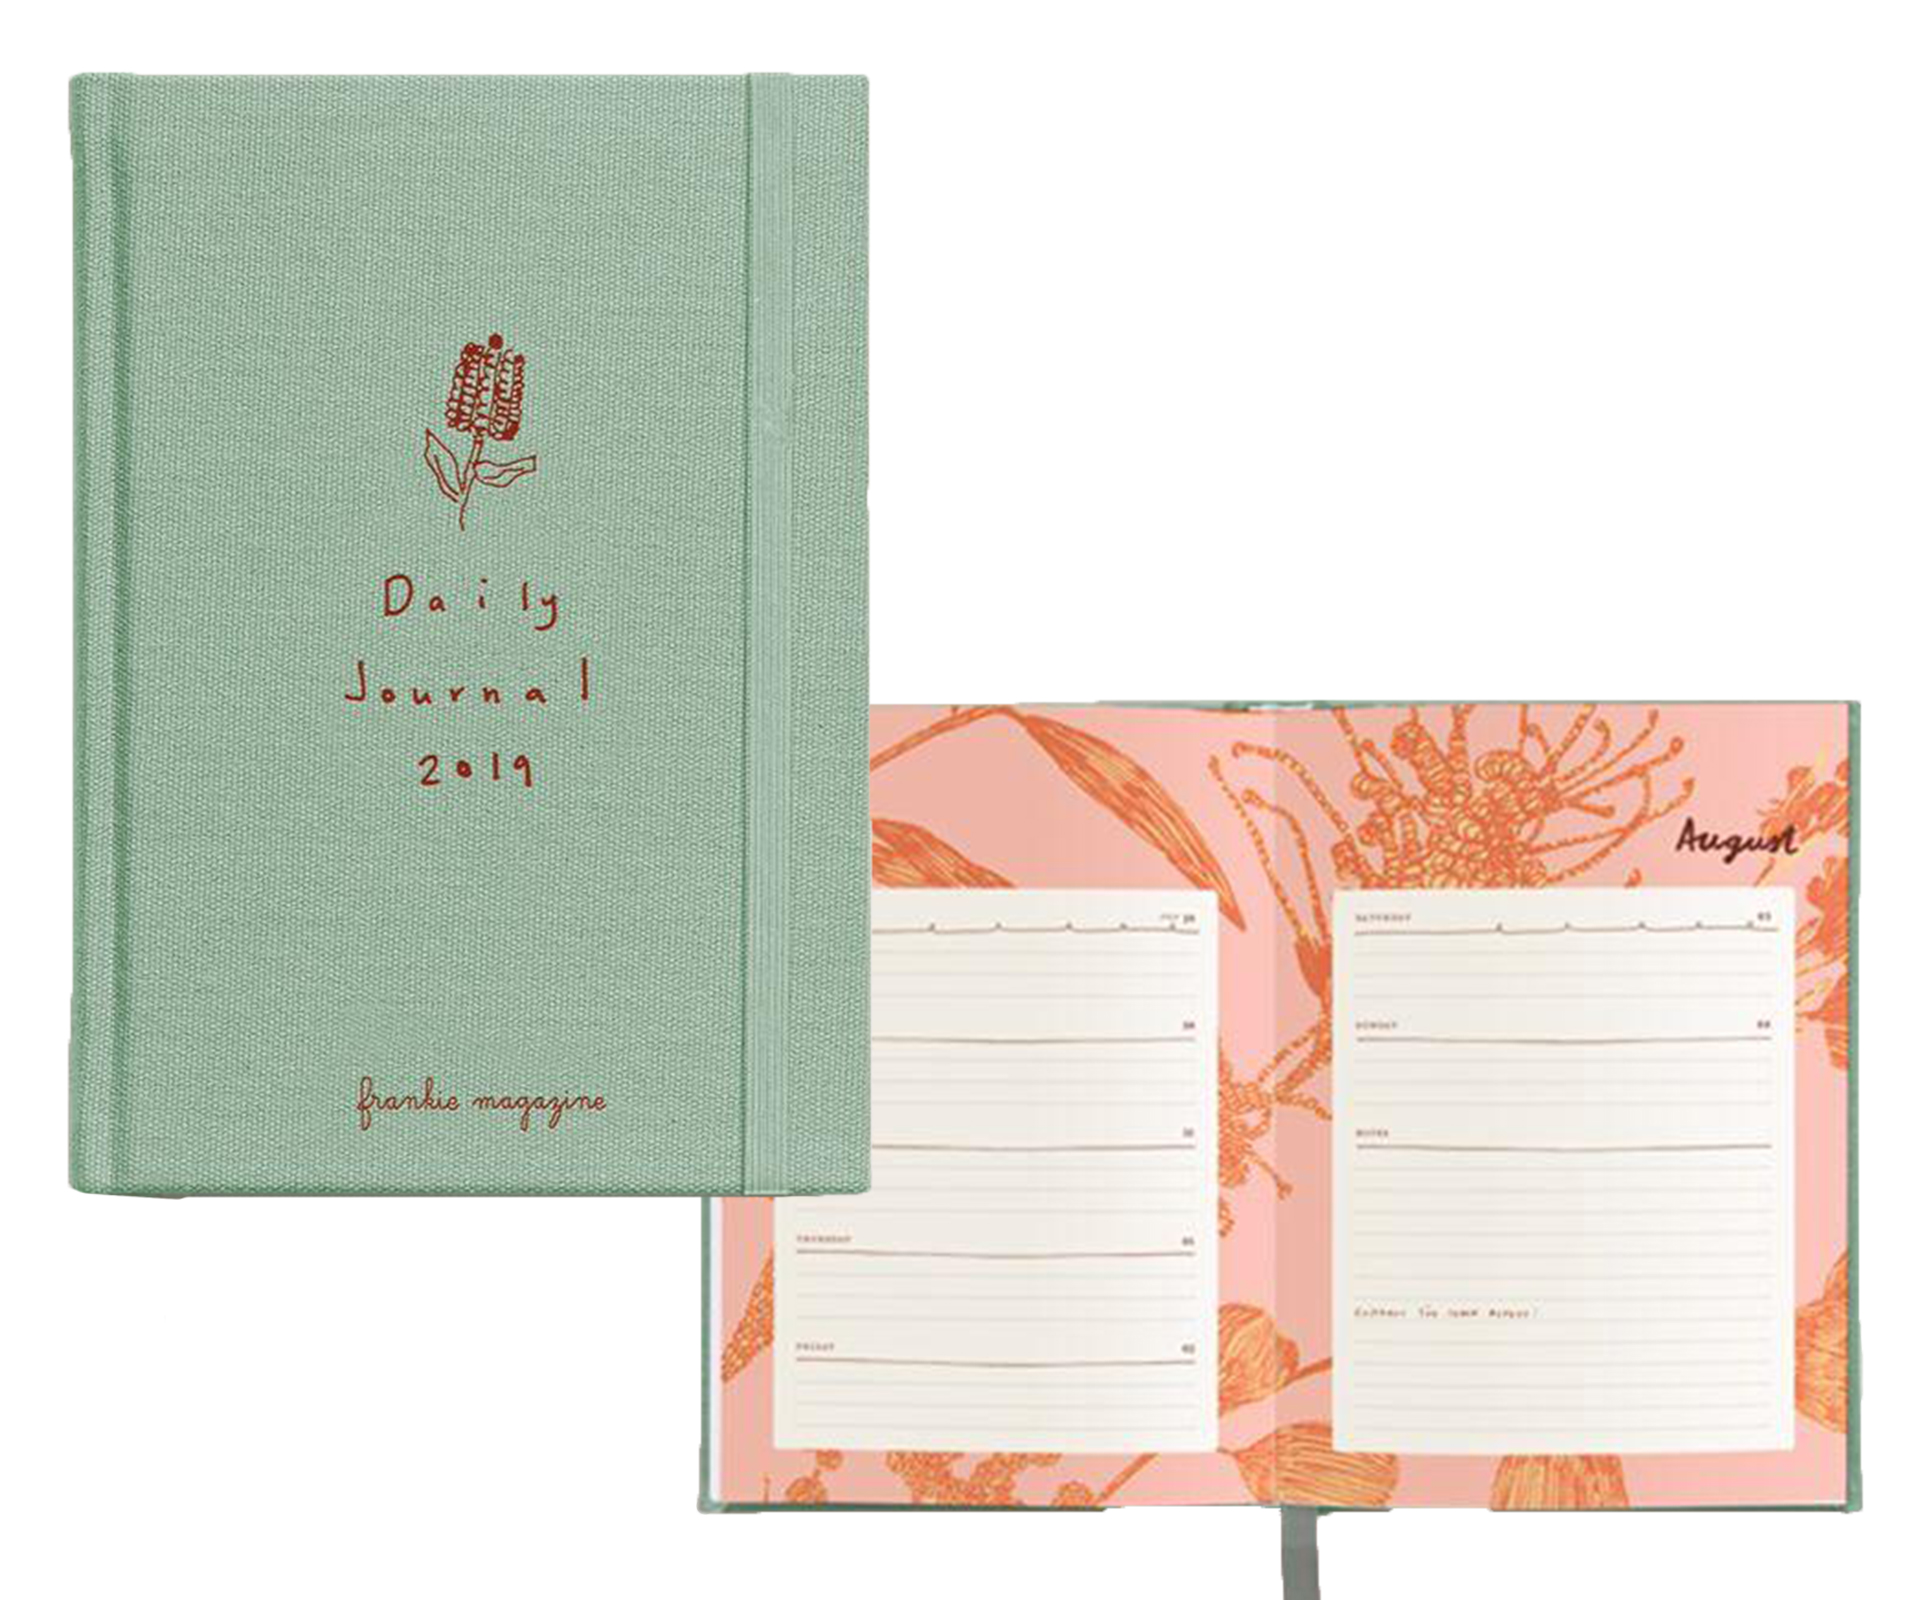 Frankie diary 2019 The annual Frankie diary took a floral note this year, featuring botanical drawings, a leaf glossary and sketch pages. As well as a weekly notes section, monthly calendars and a weekly spread, they have included tear-out gift tags, cards and handy stickers. Around $35 from Frankie.